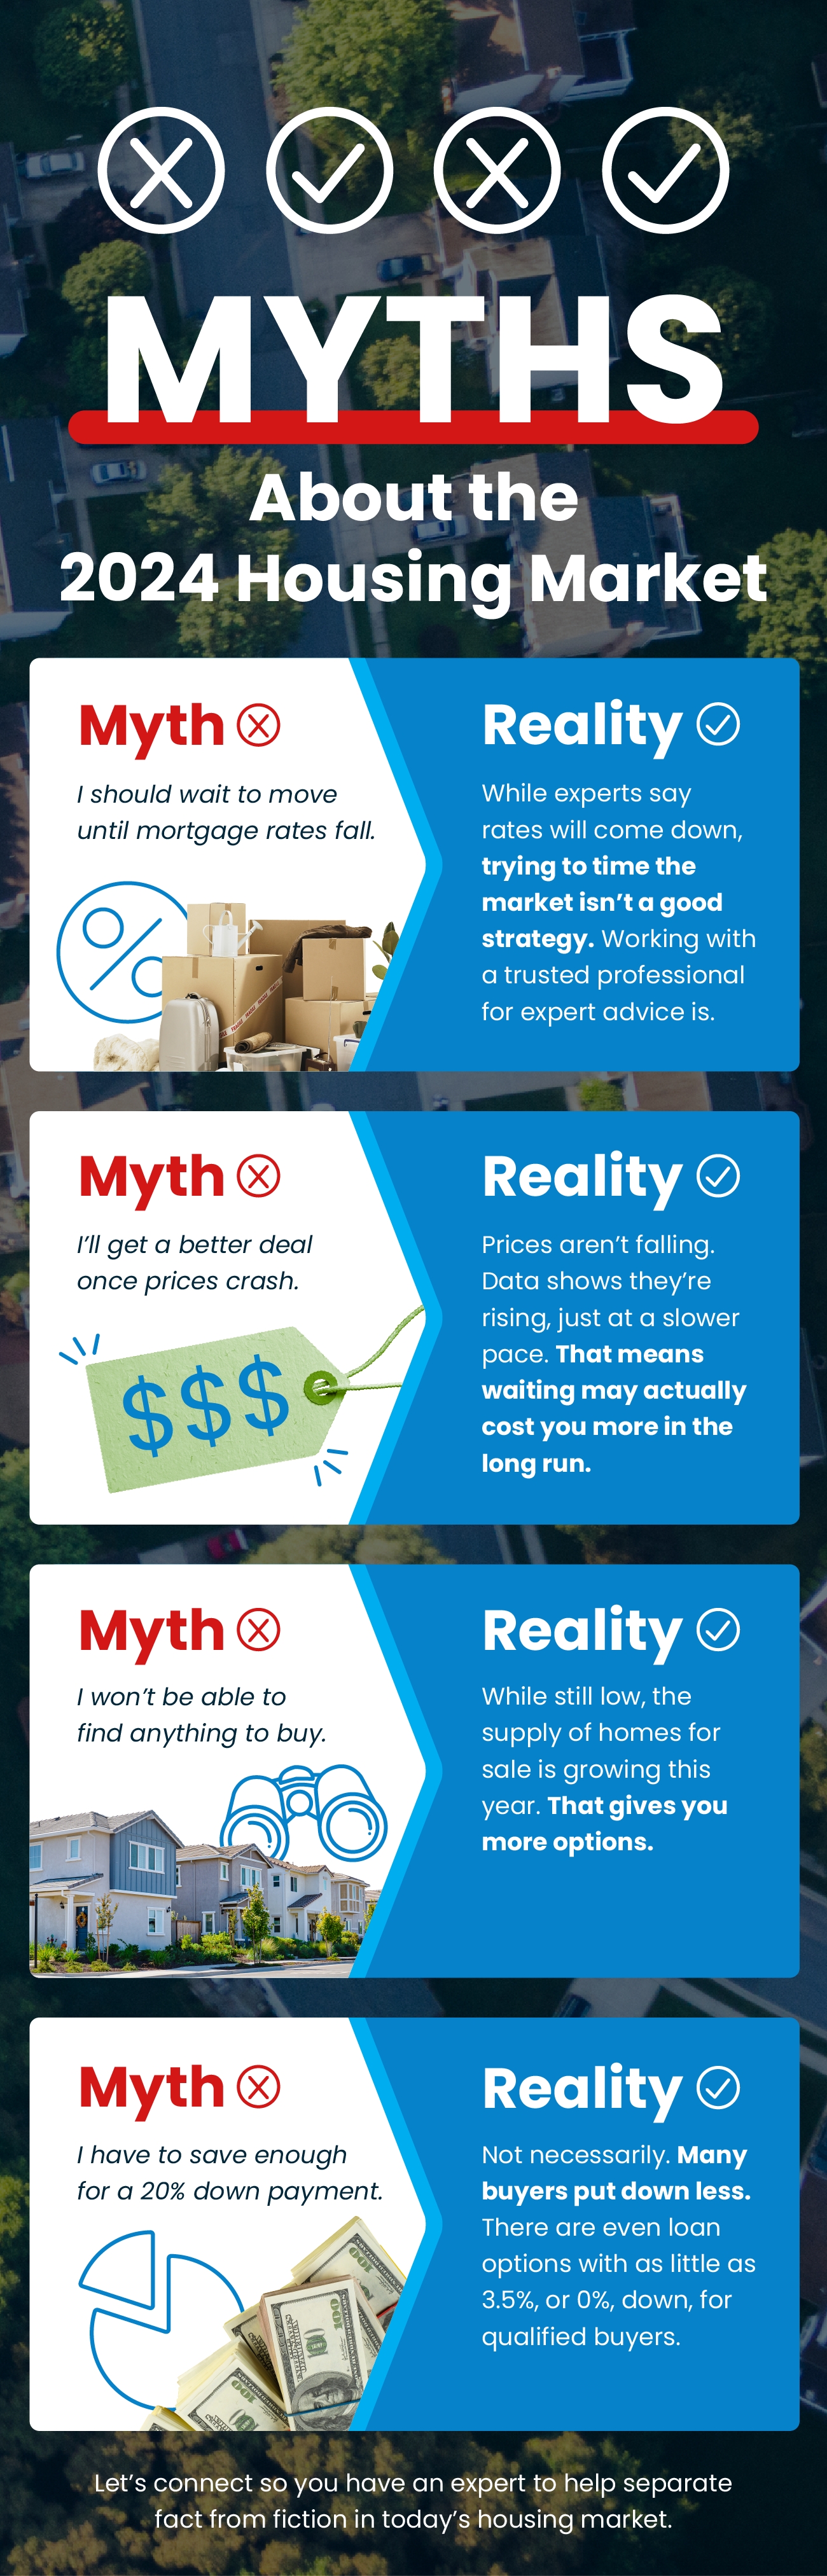 Myths About the 2024 Housing Market [INFOGRAPHIC]